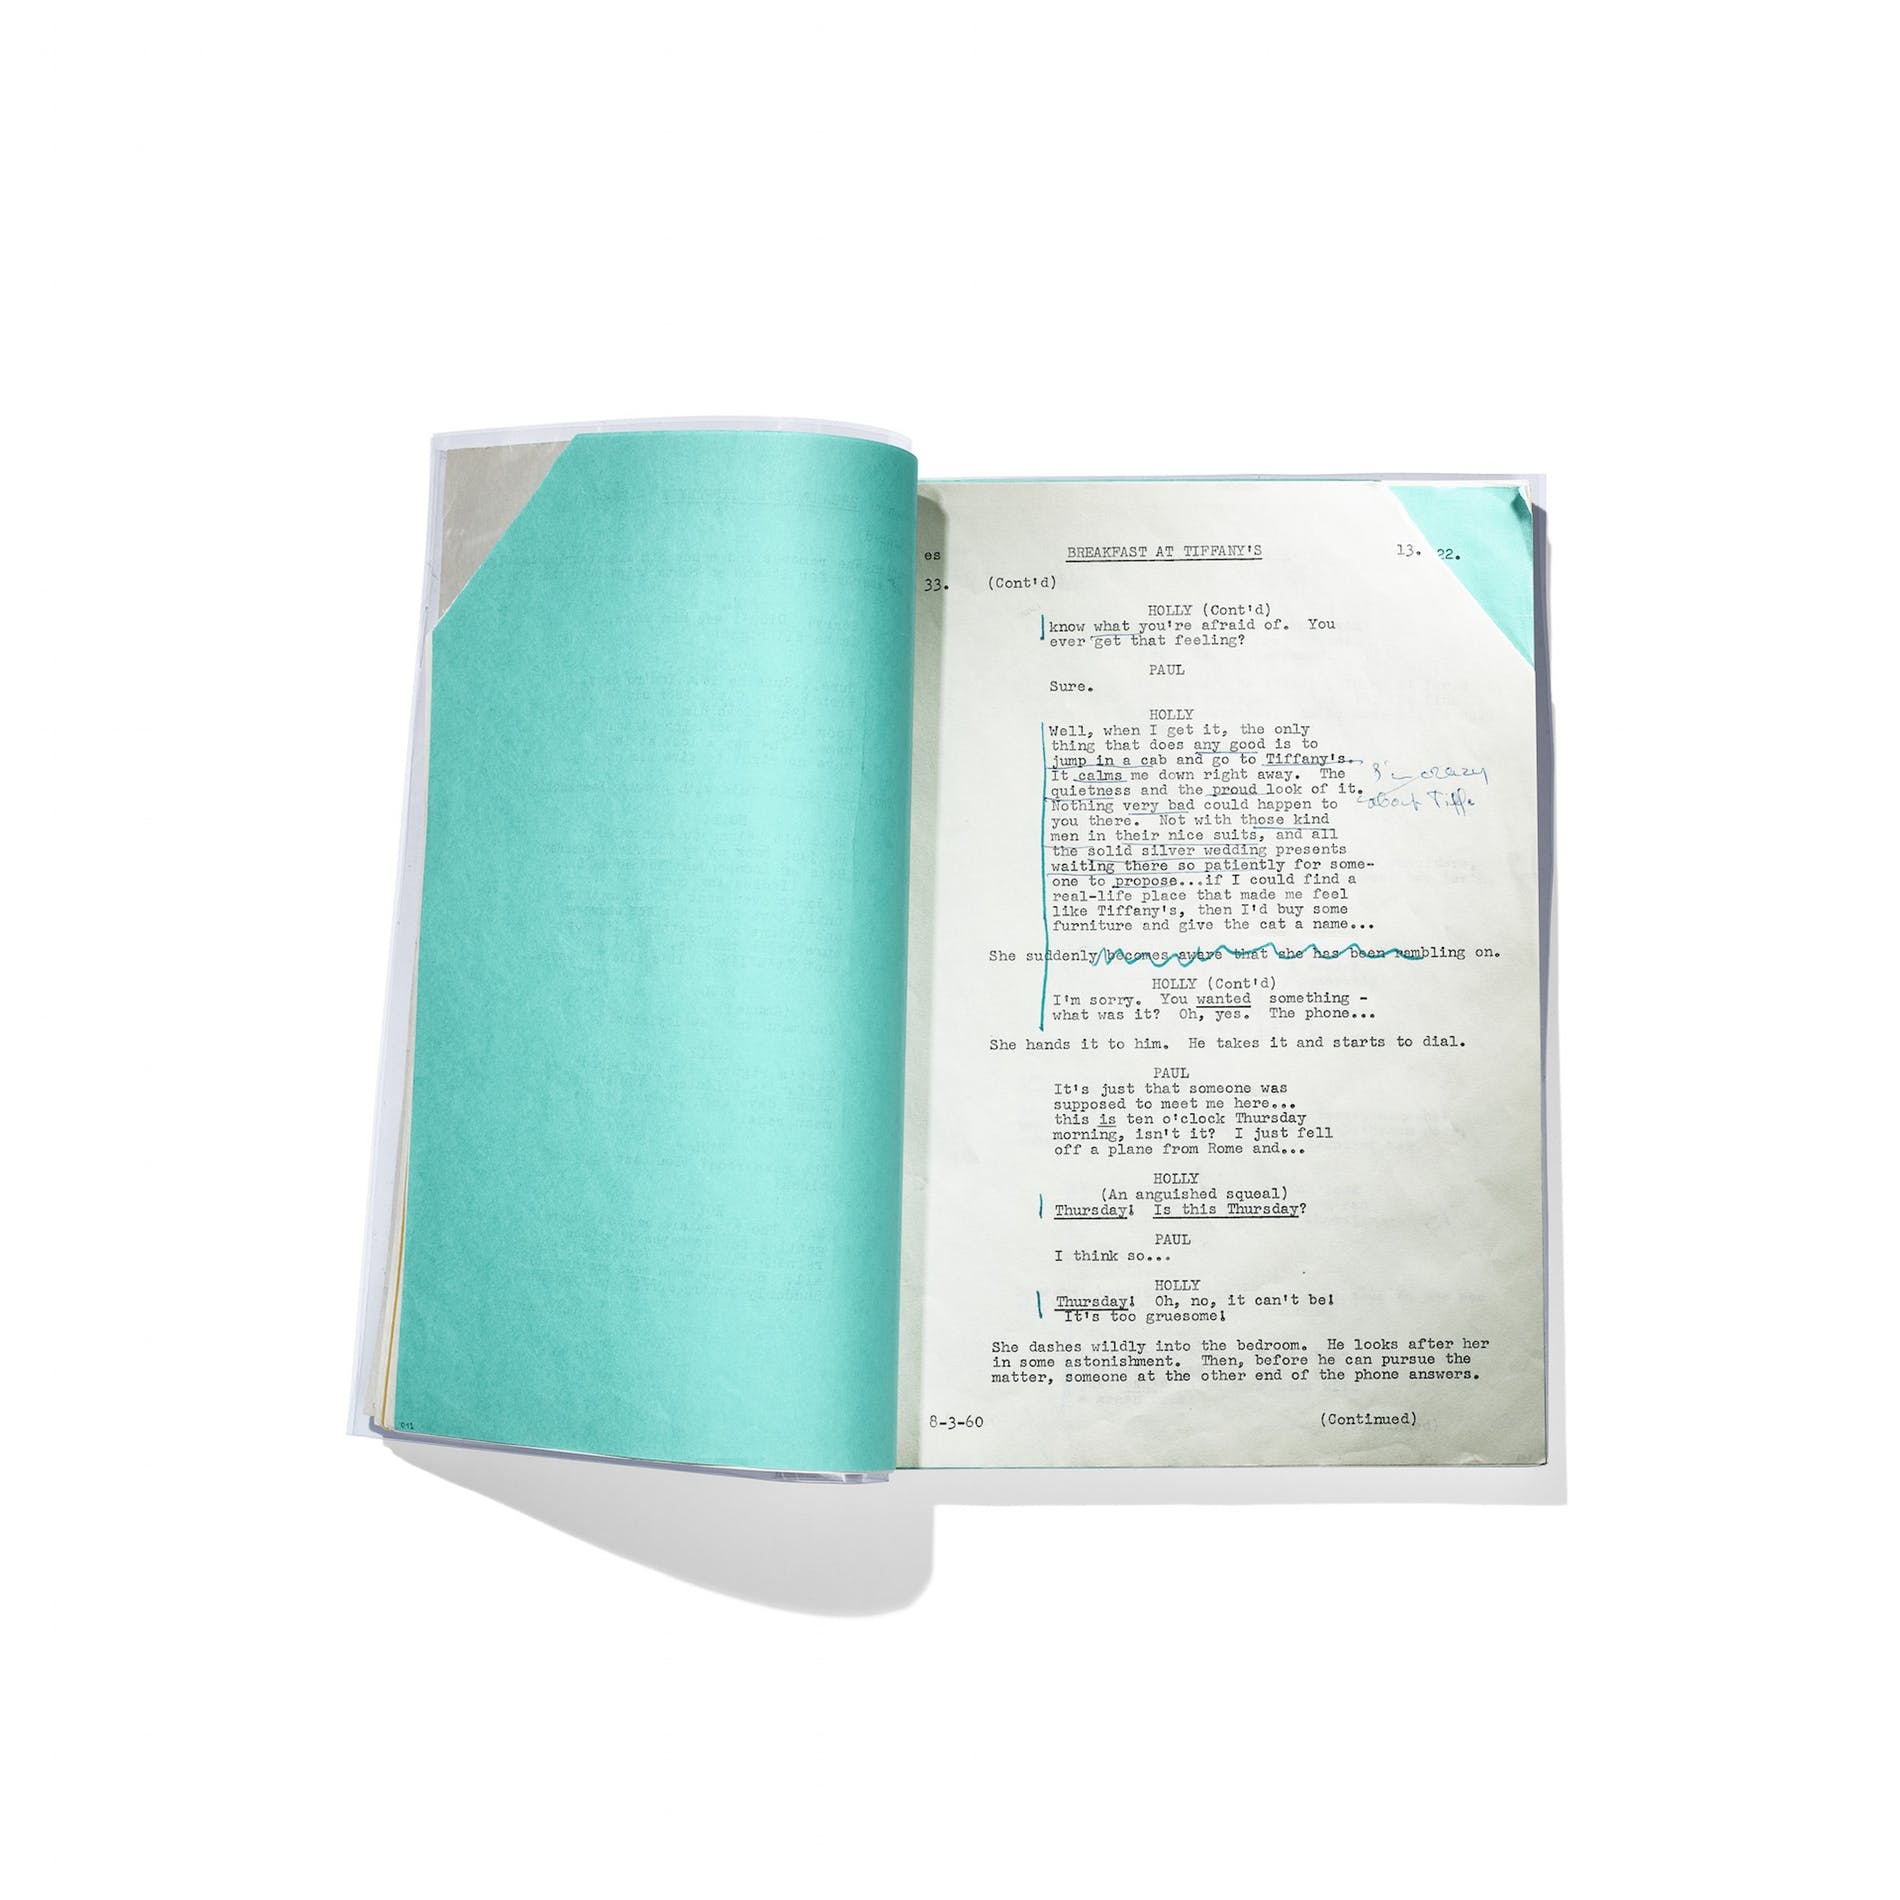 The original Breakfast at Tiffany’s script with Audrey Hepburn’s personal annotations